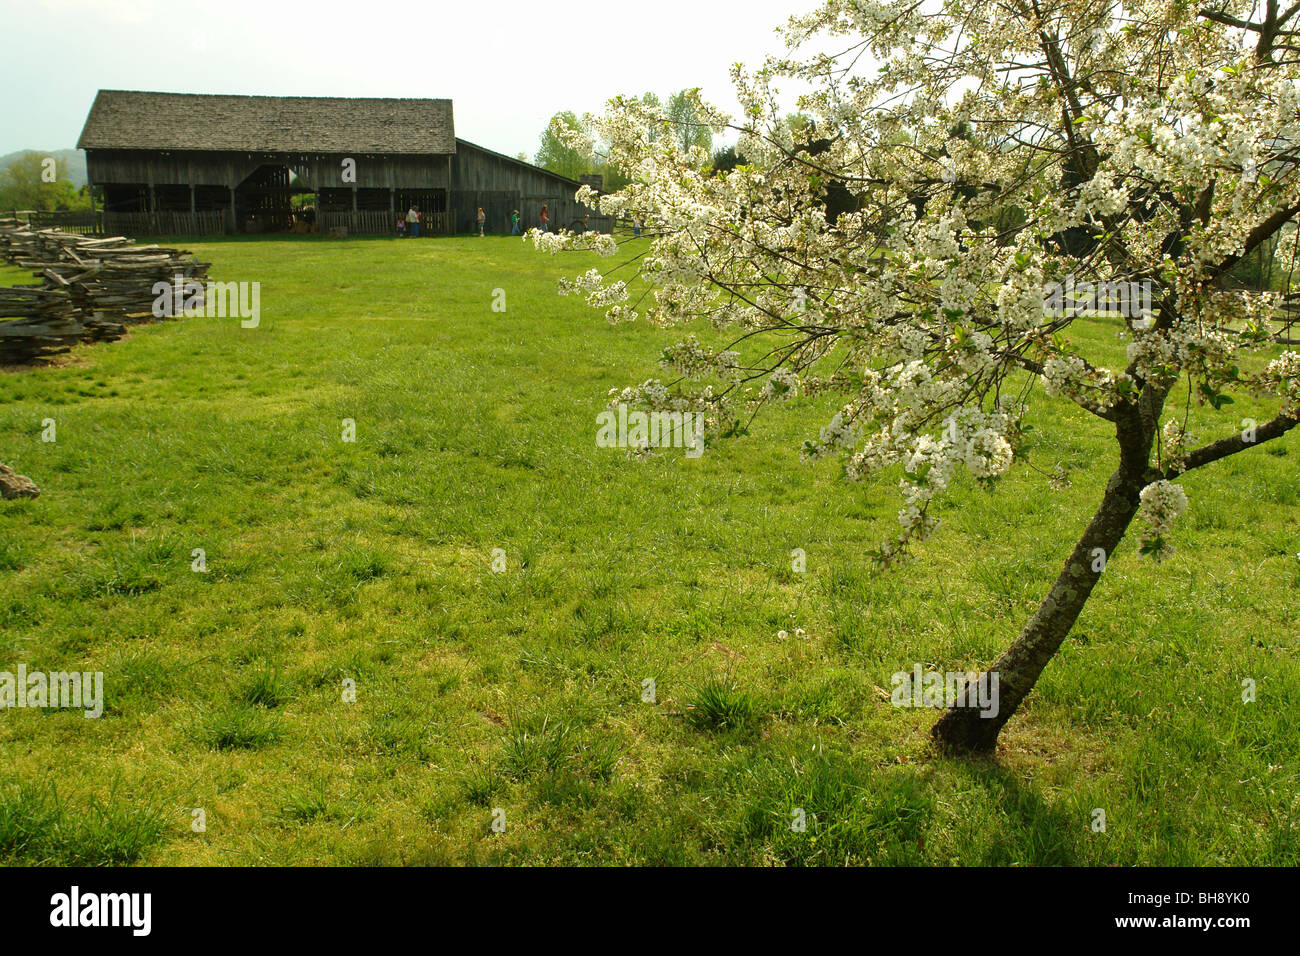 AJD64409, Piney Flats, TN, Tennessee, Rocky Mount State Historic Museum, barn Stock Photo